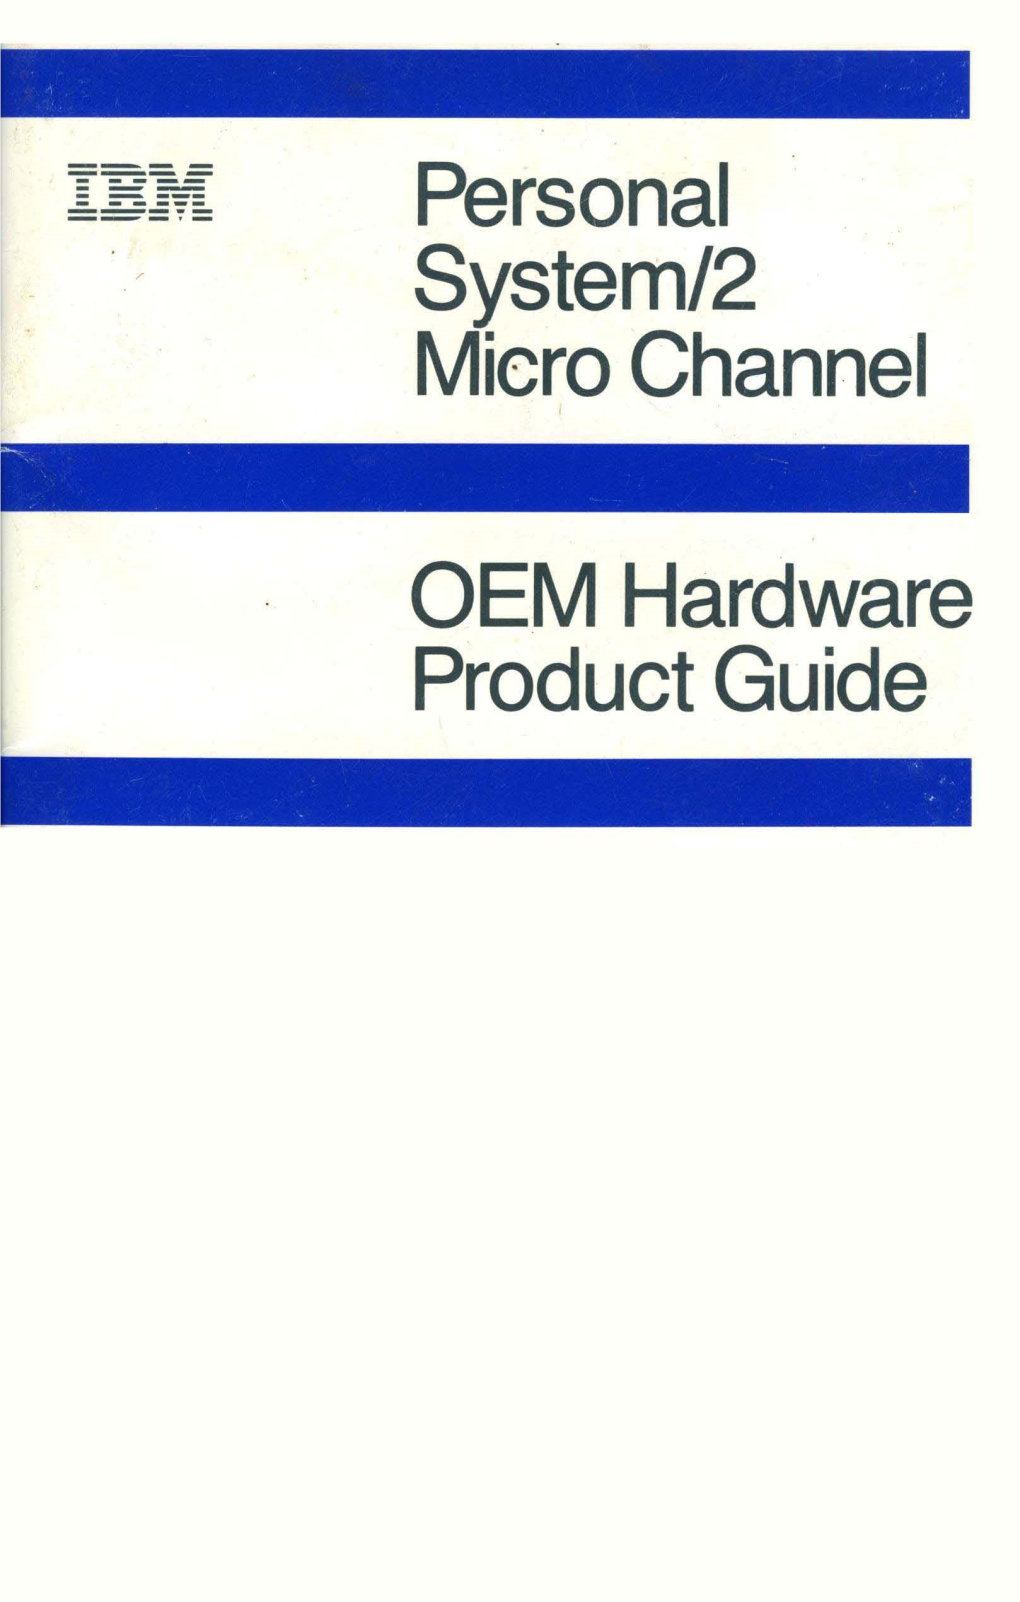 Personal System/2 Micro Channel OEM Hardware Product Guide